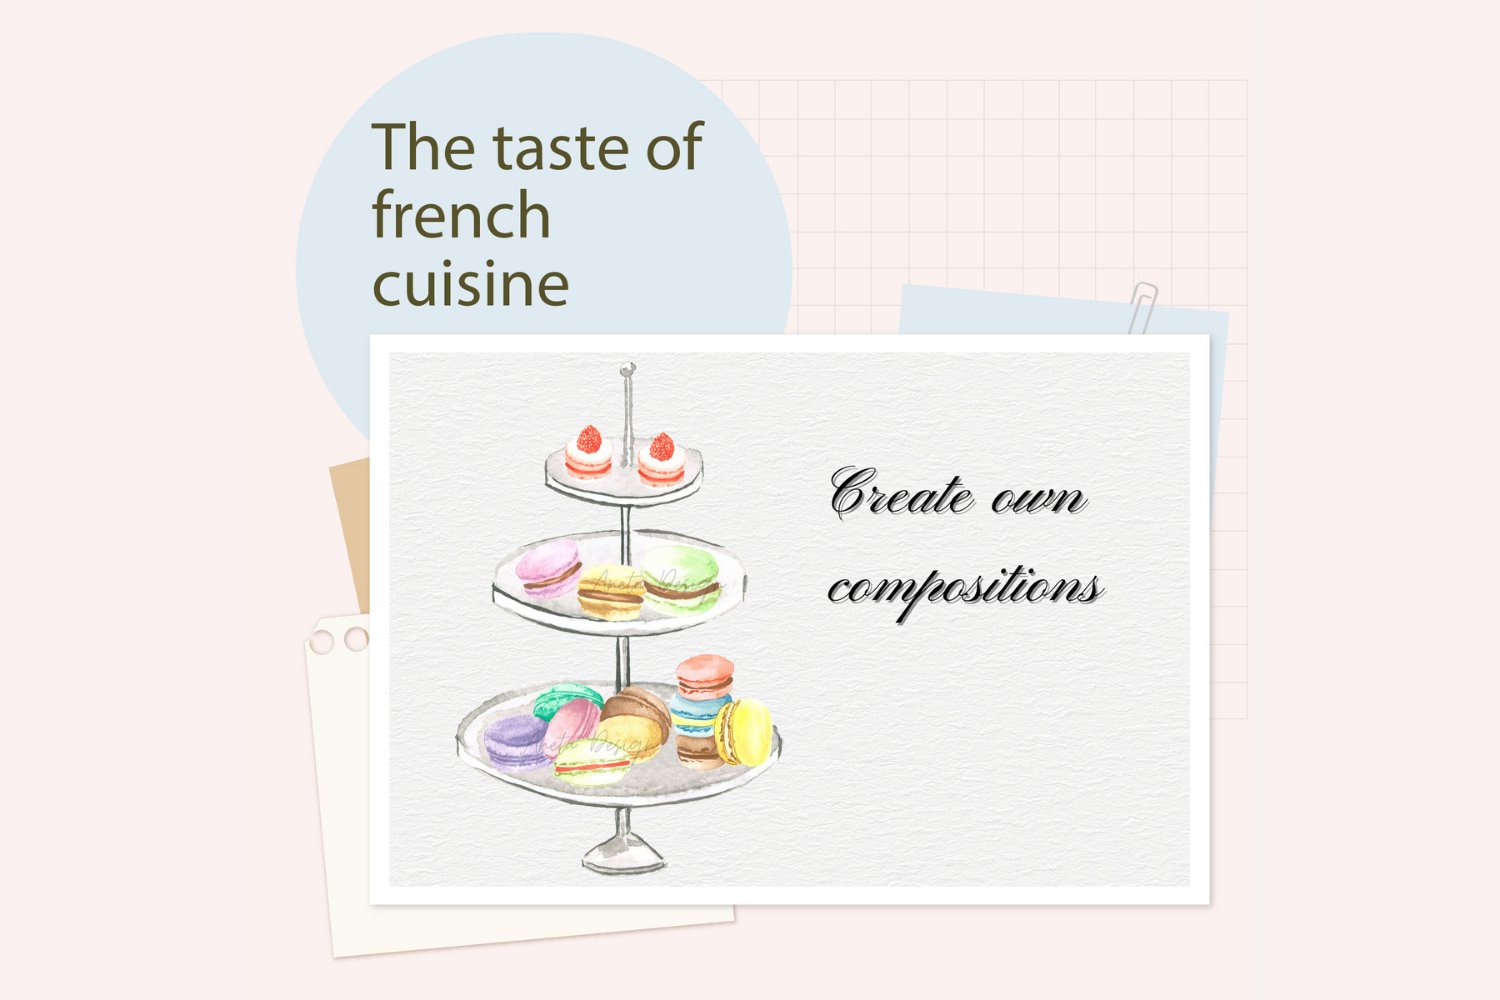 Peach illustration with the taste of french cuisine.